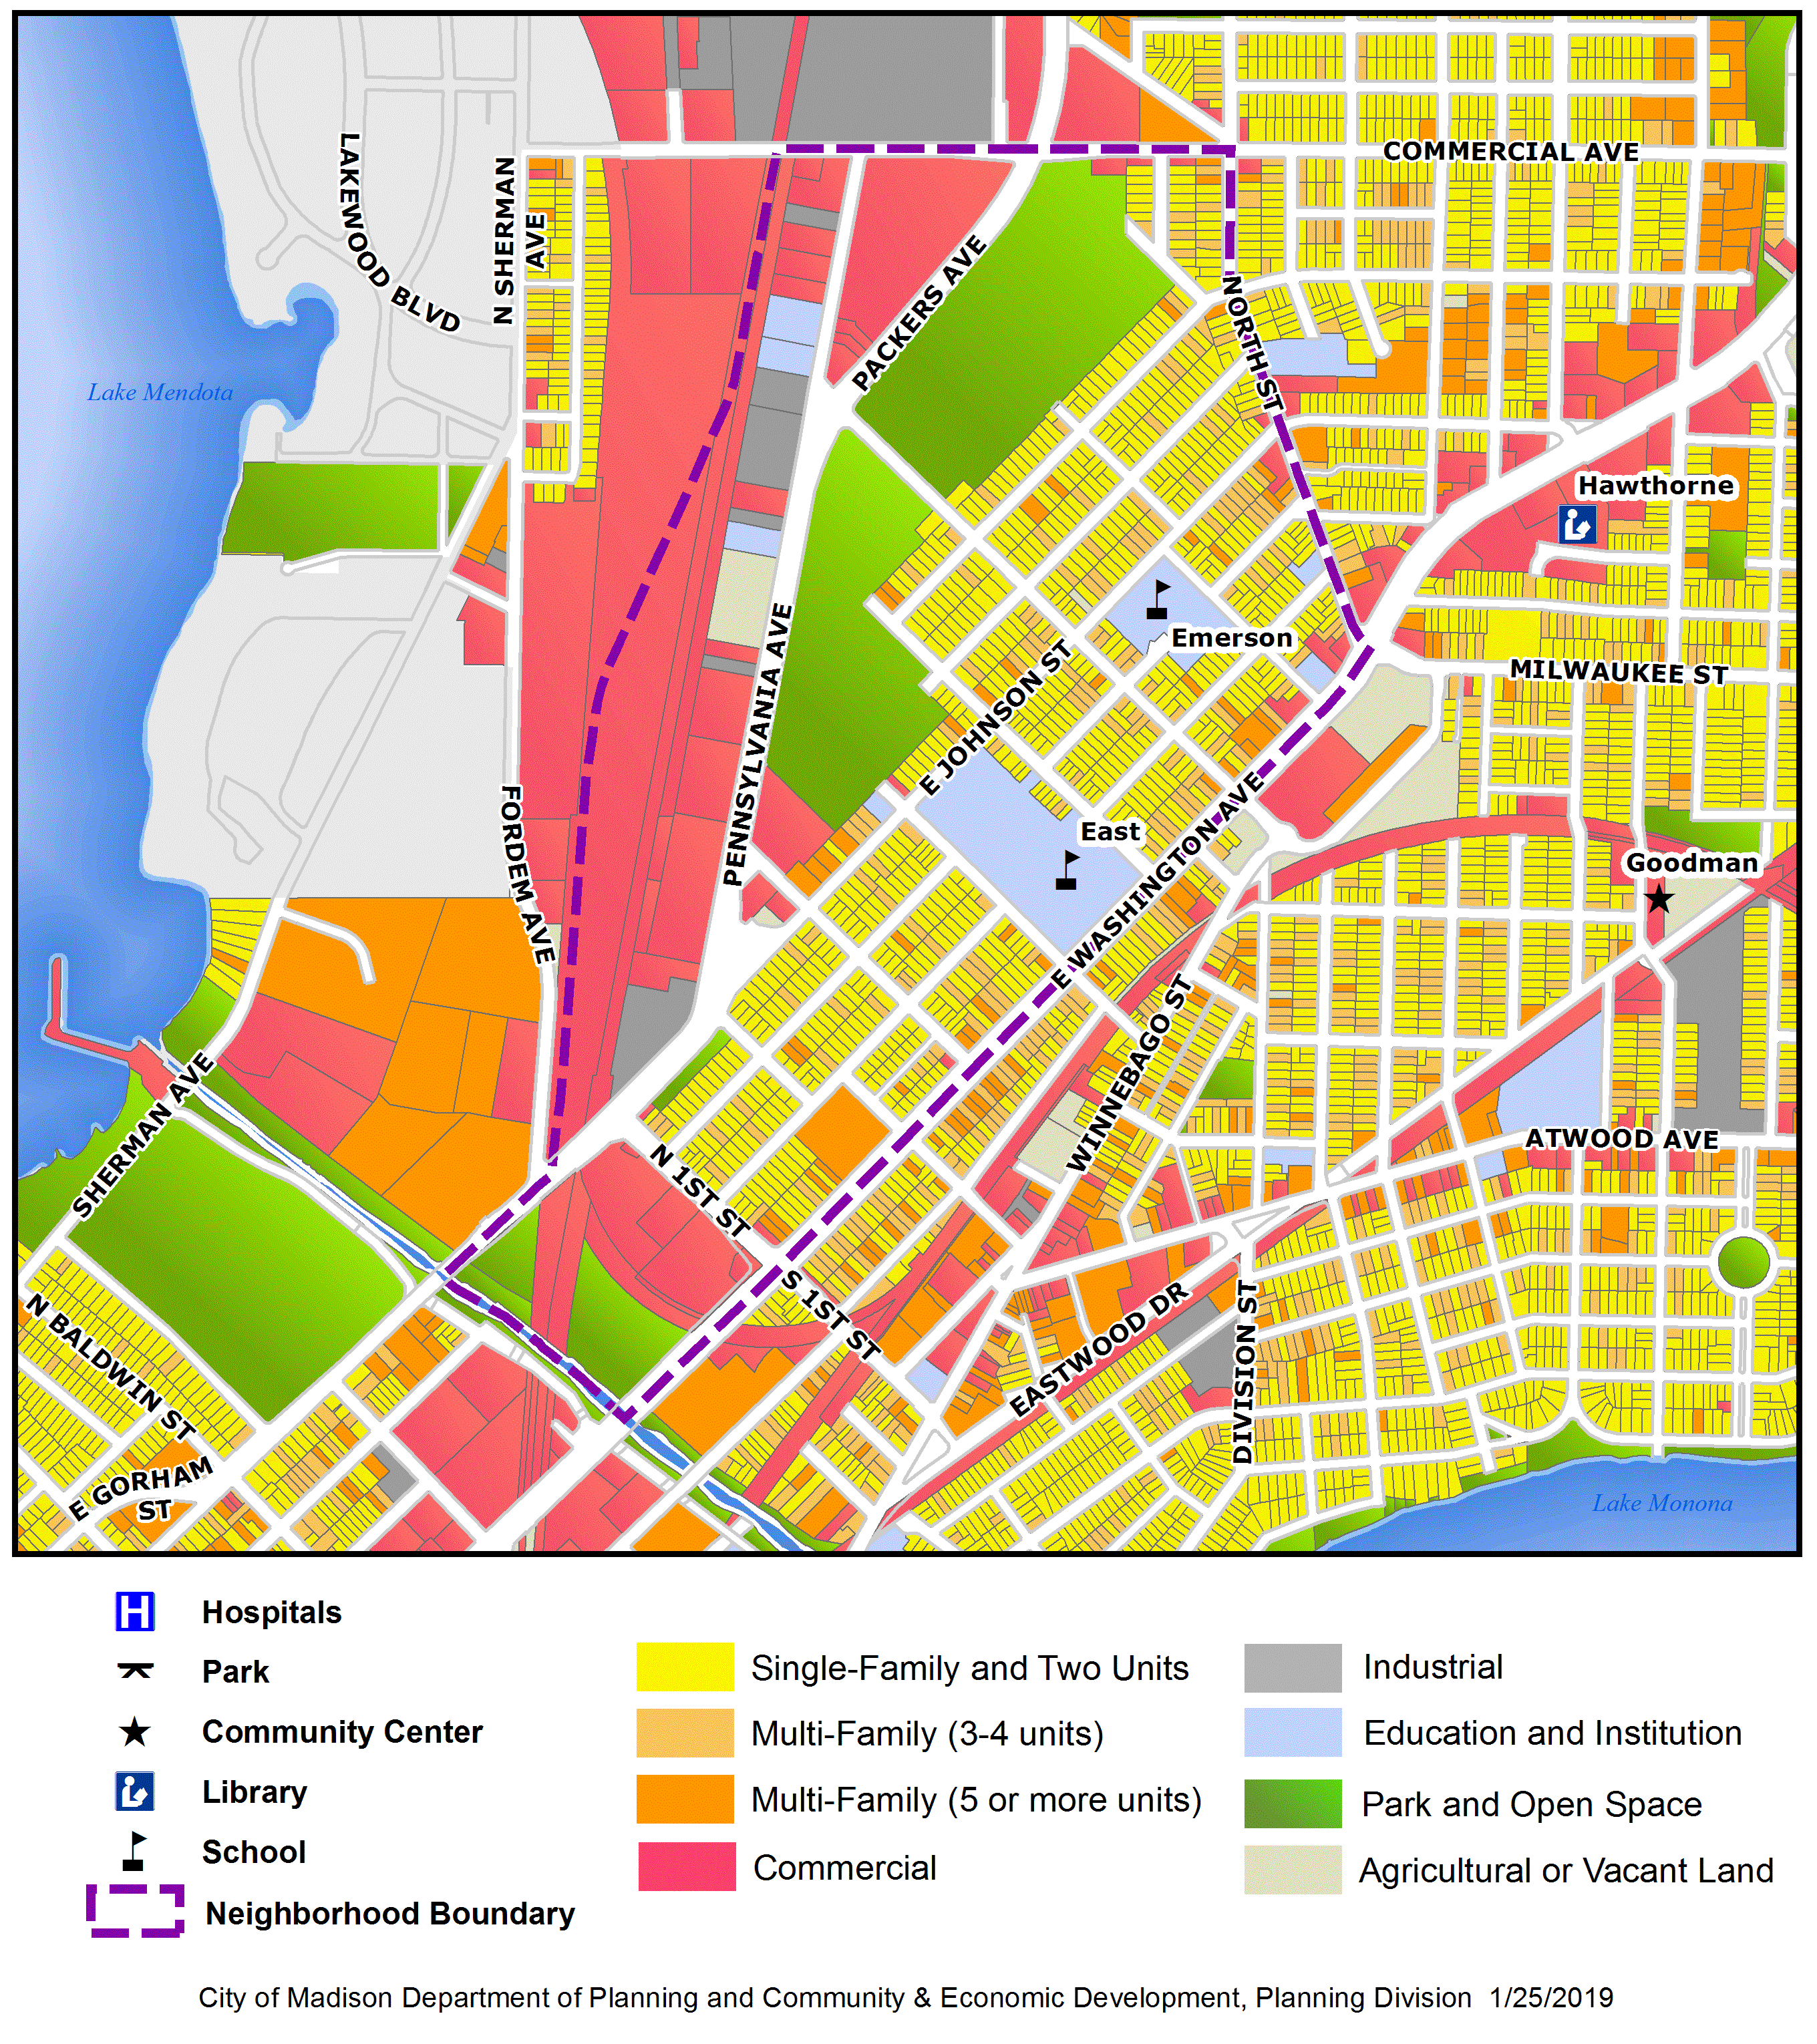 Emerson East map